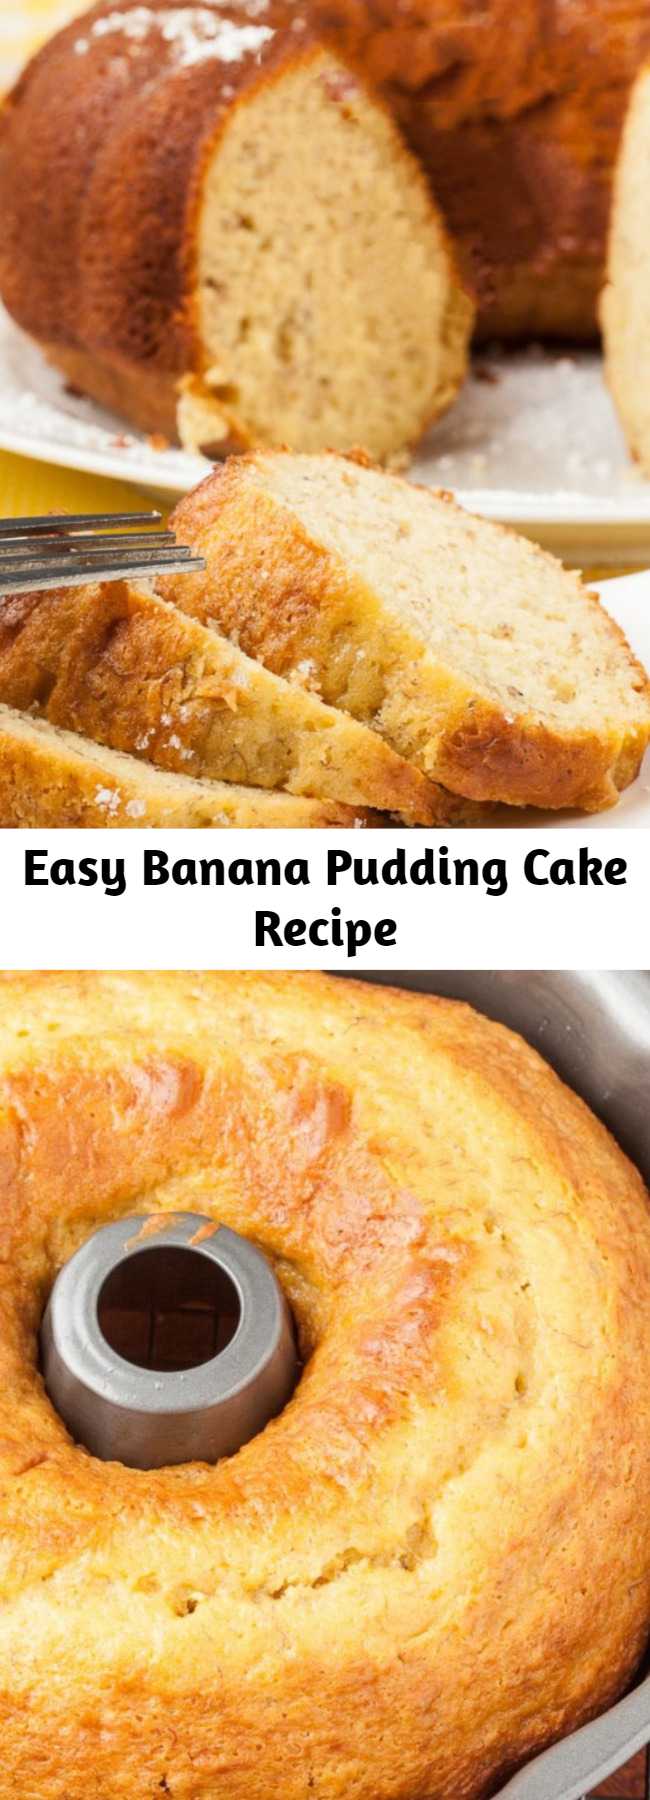 Easy Banana Pudding Cake Recipe - This Banana Pudding Cake is dreamy and luscious! It’s extremely moist, tender, and boasts huge banana flavor. This cake is perfect for brunch and dessert alike. It’s delish without any icing, but feel free to add your own if you wish!